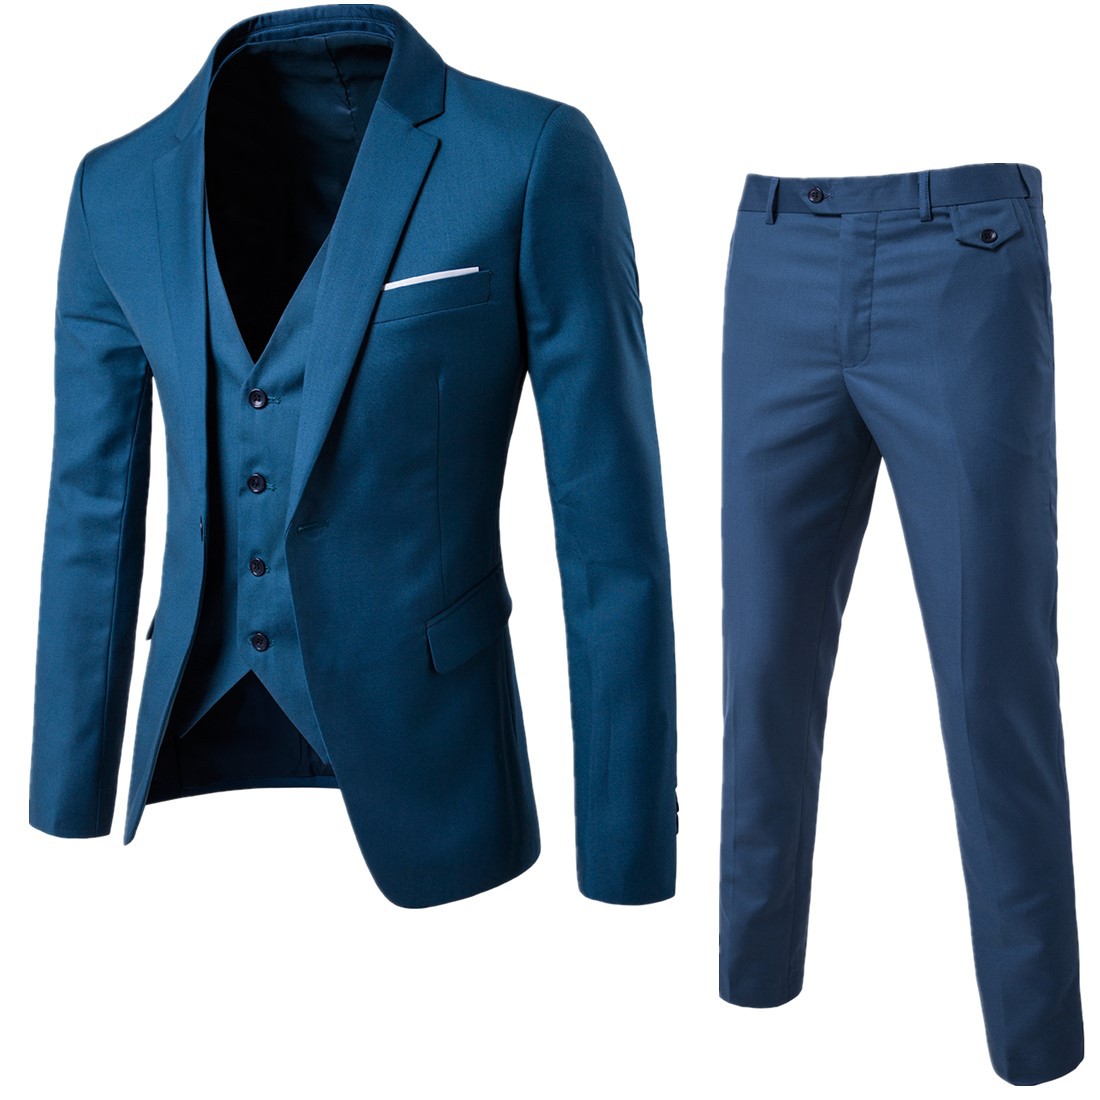 New style suit yarn dyed jacquard work suit three piece wedding groom best man casual suit